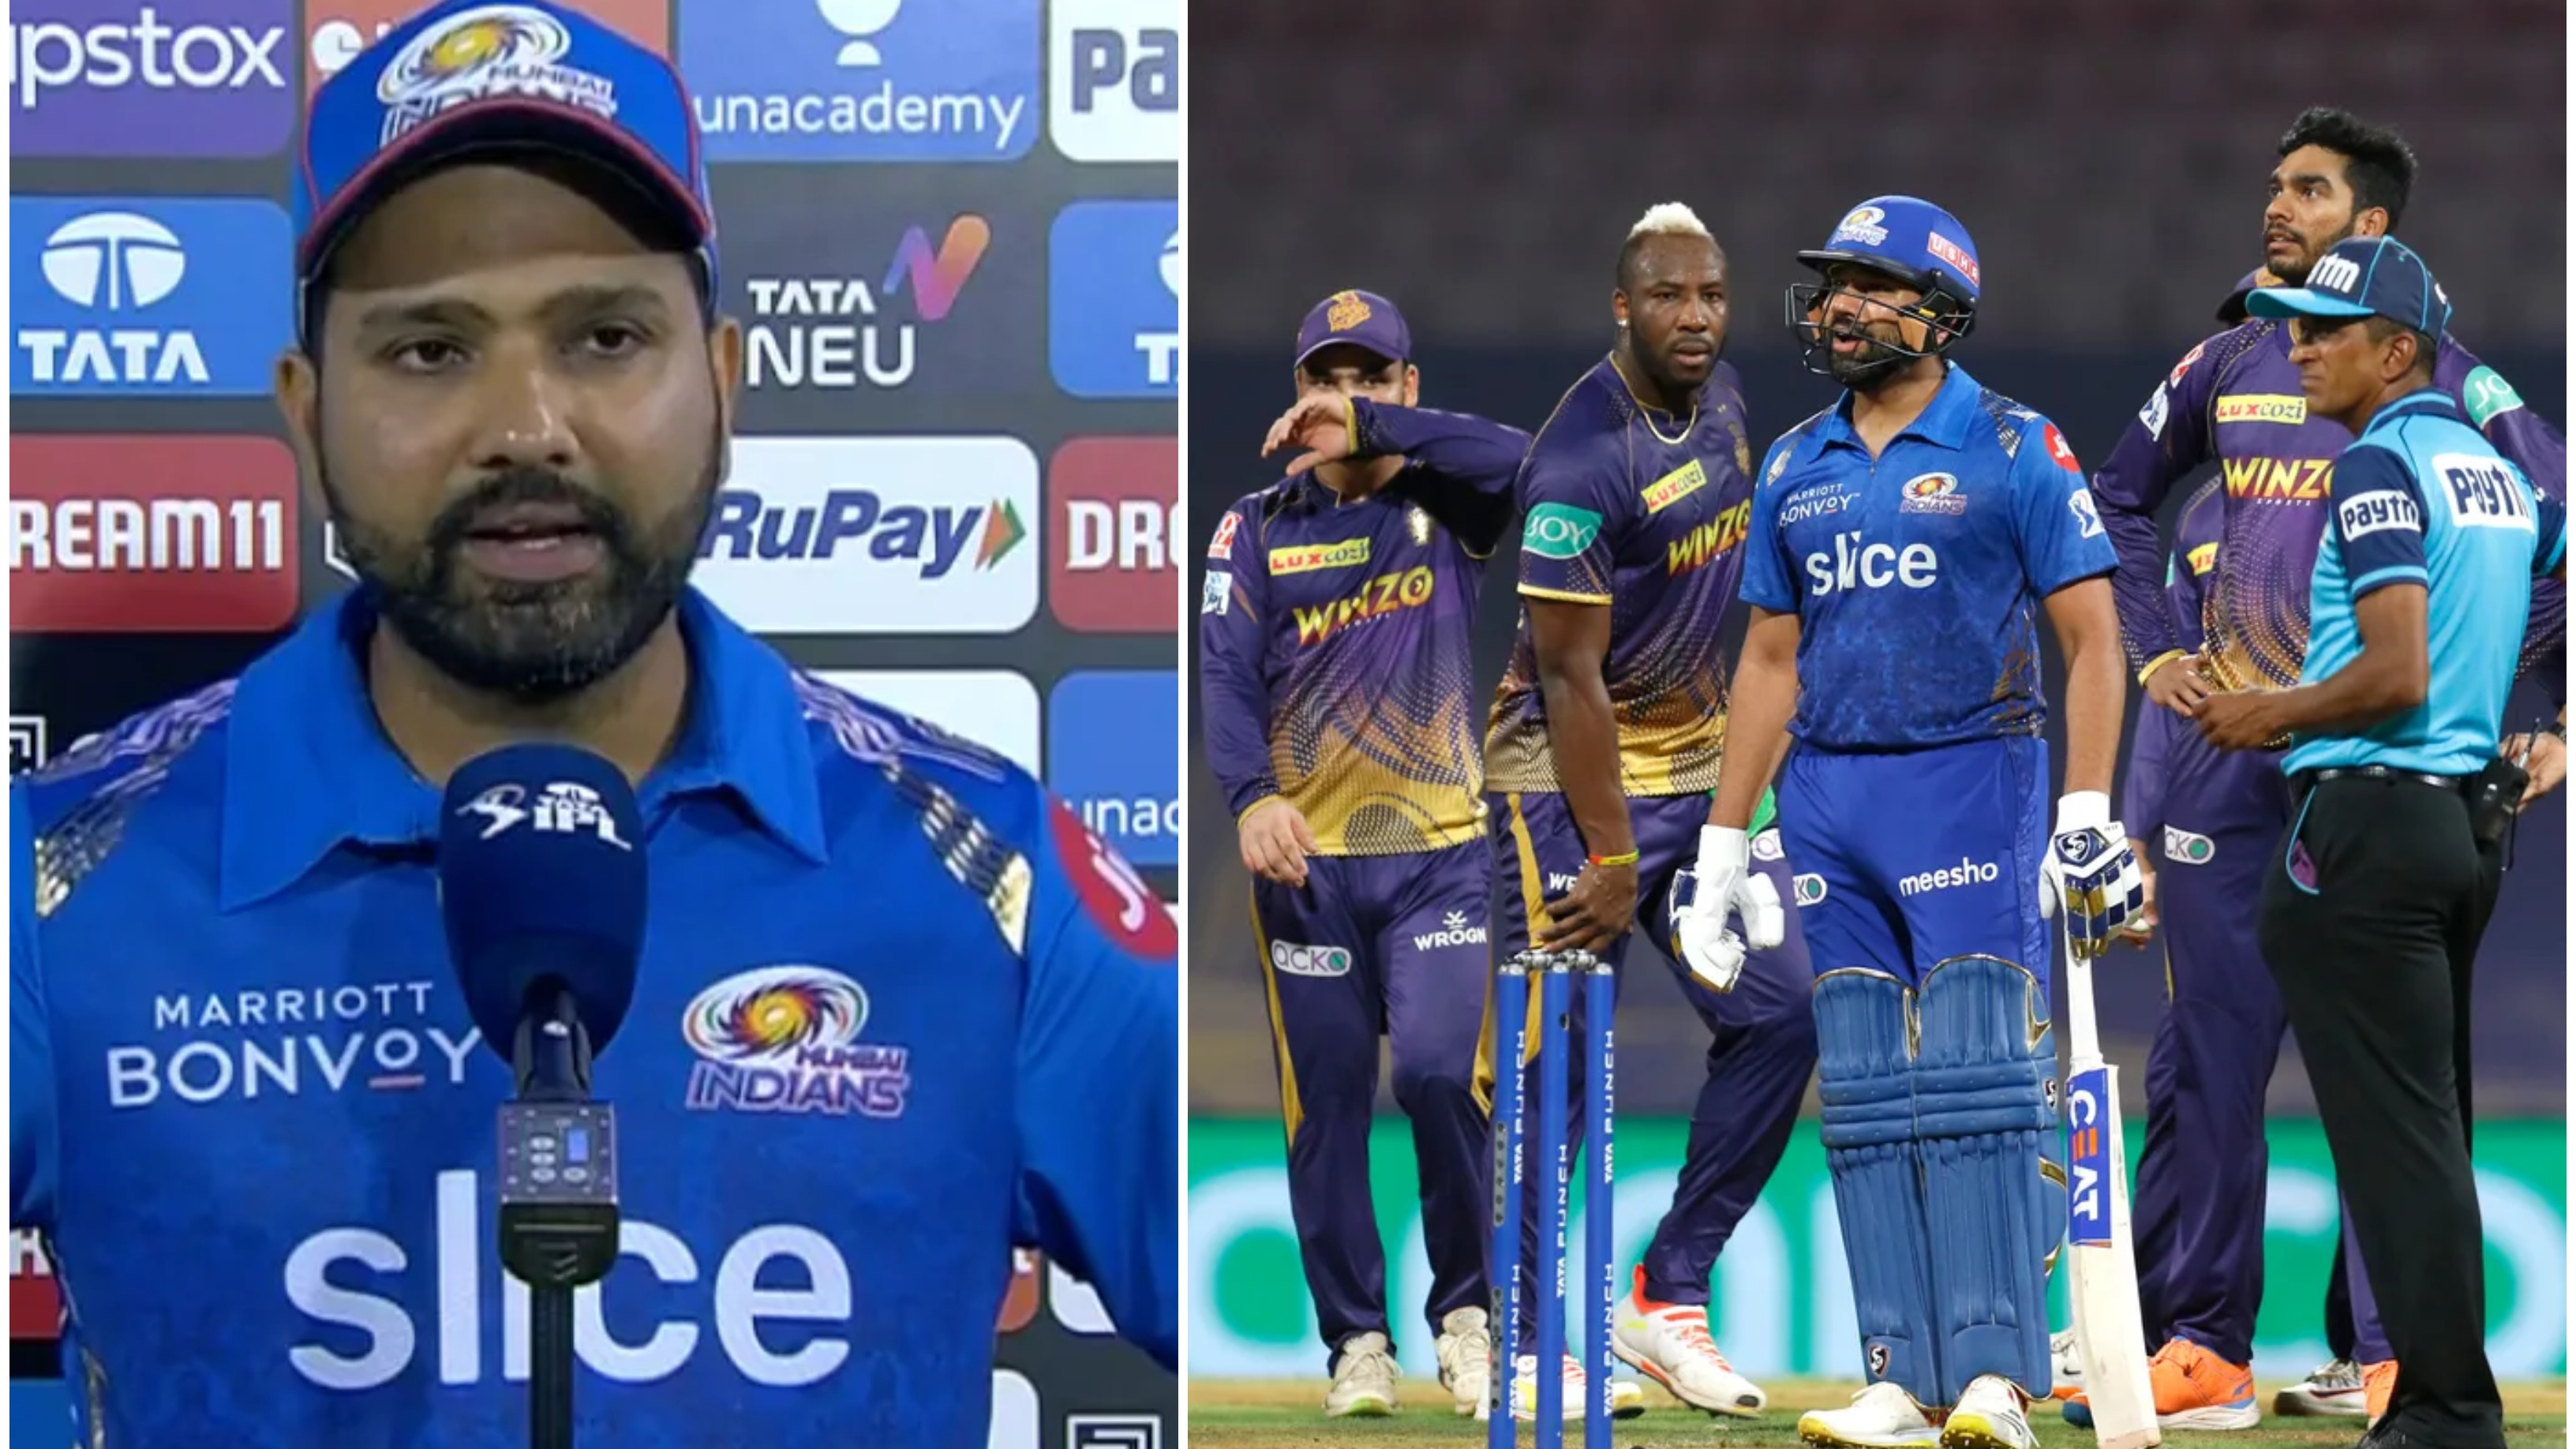 IPL 2022: ‘Disappointed with the way we batted’, Rohit Sharma after MI’s heavy loss to KKR